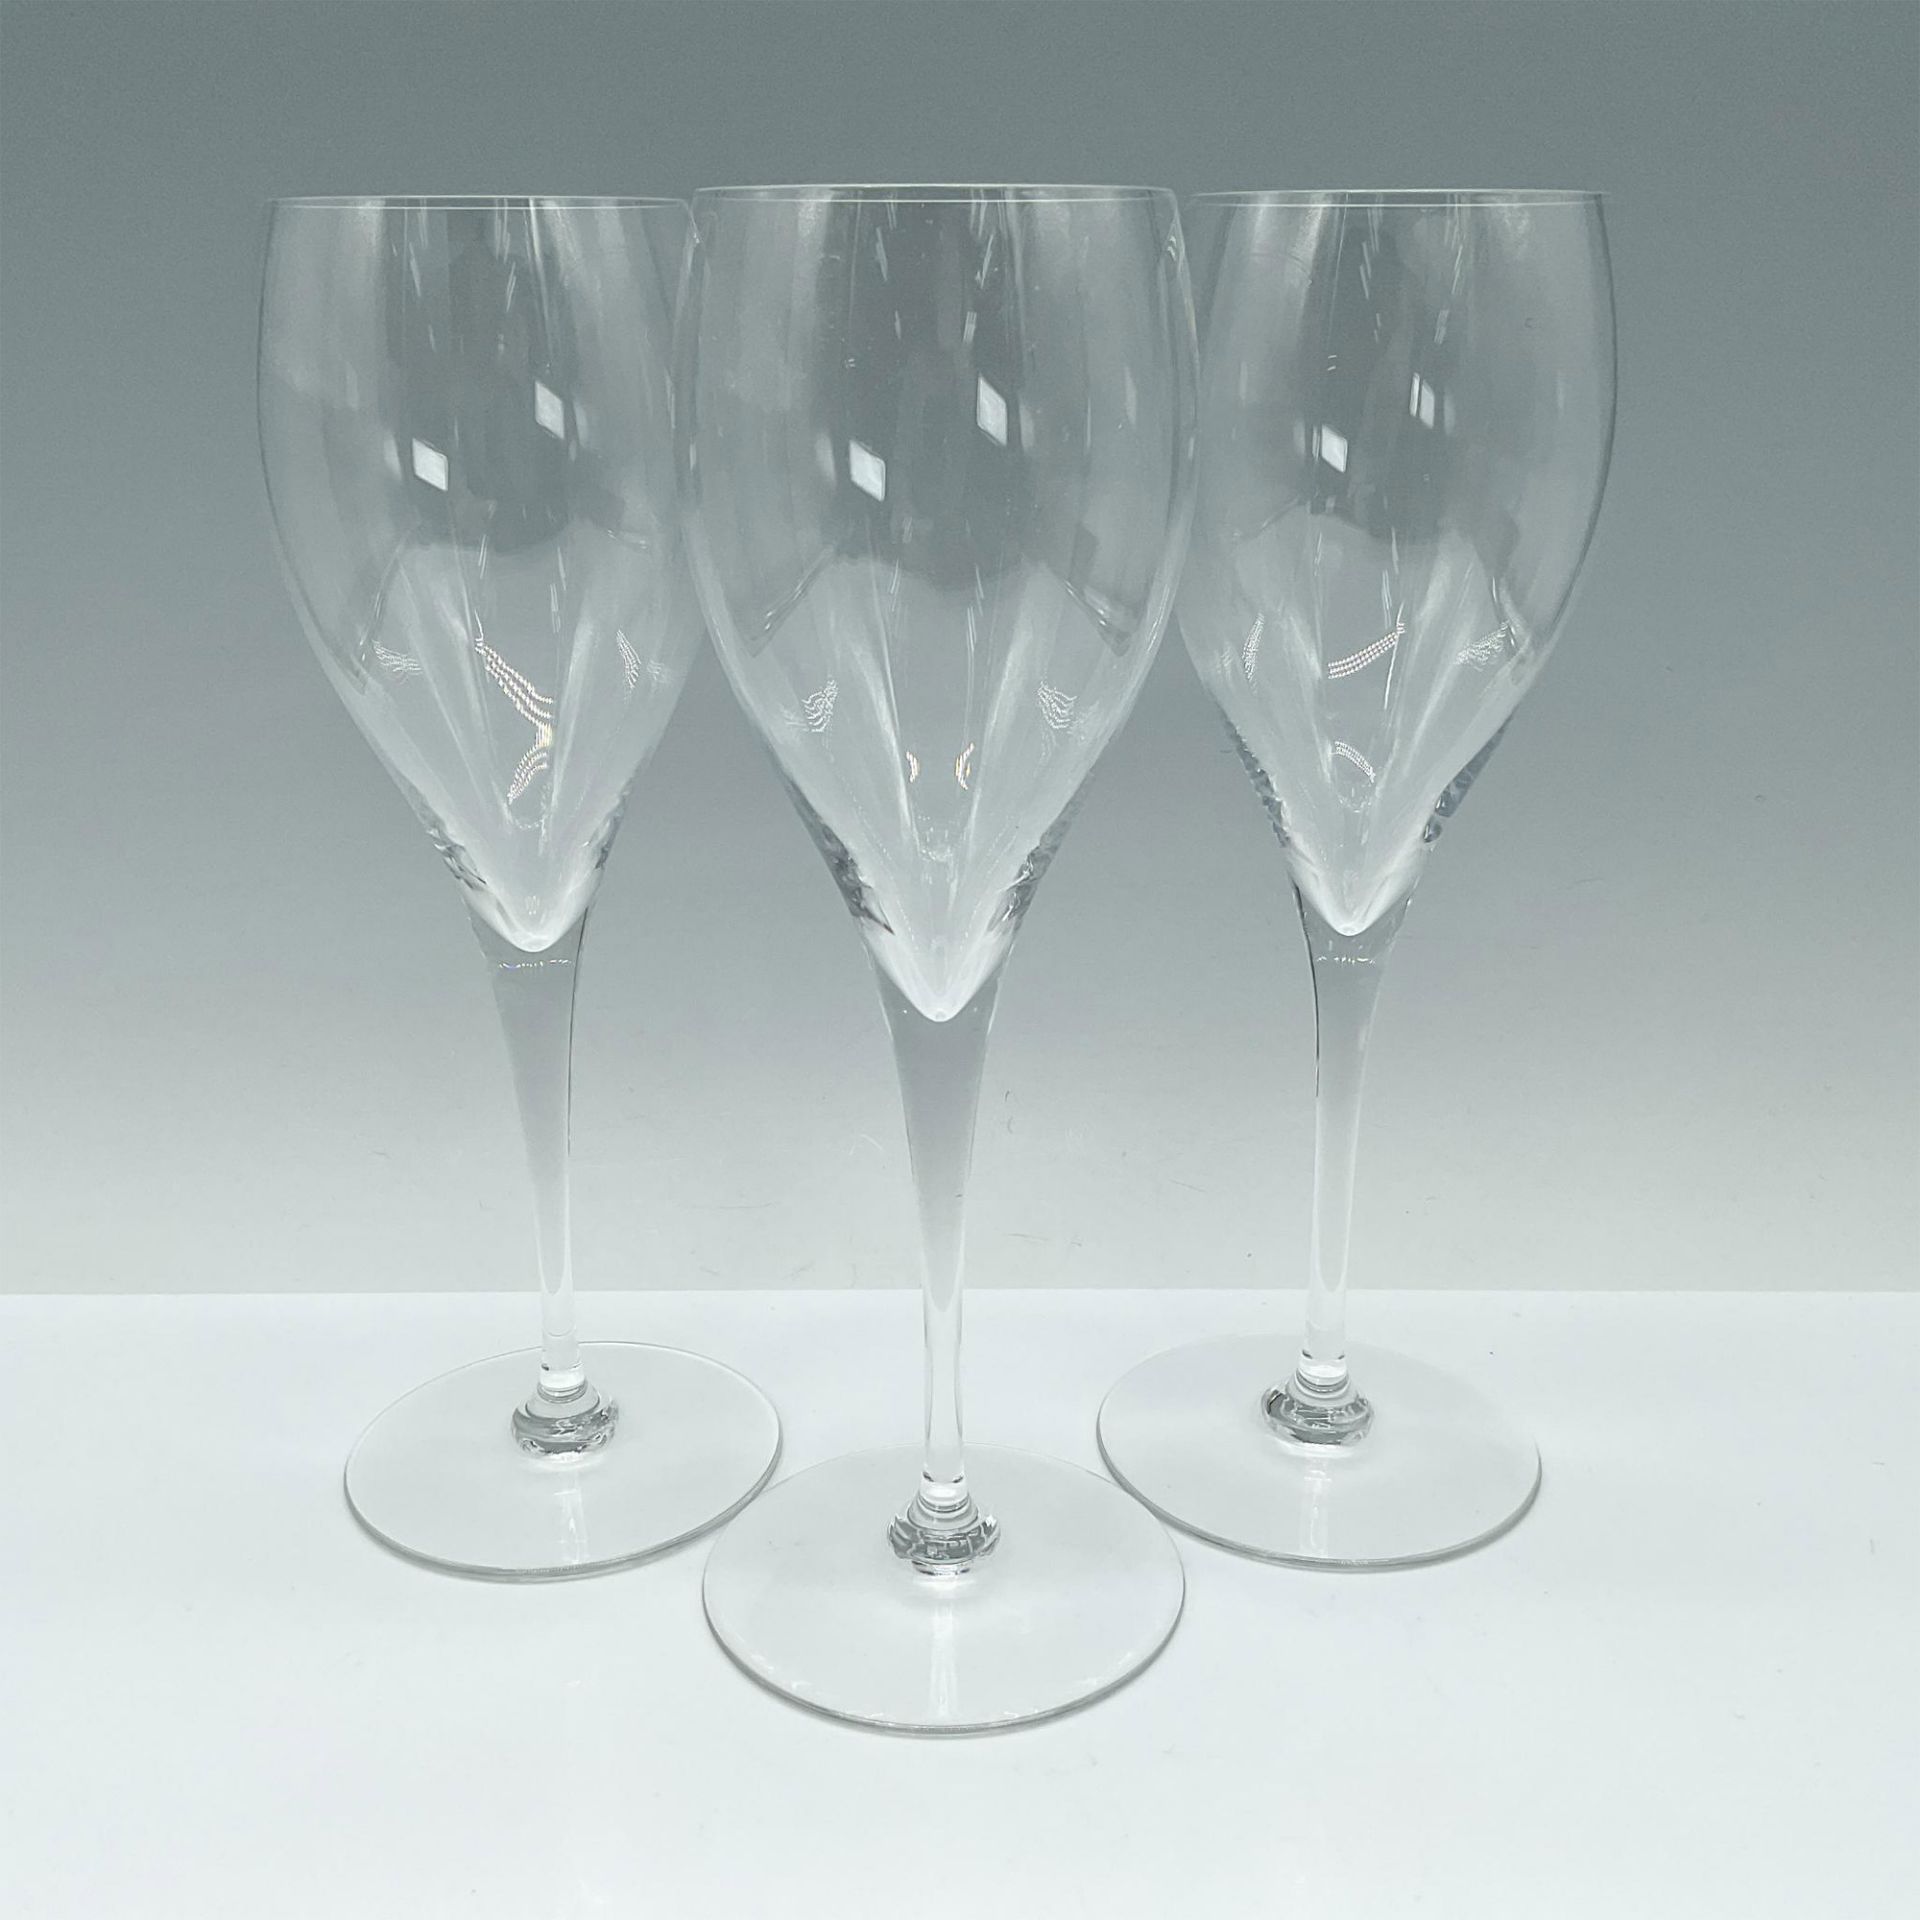 3pc Baccarat Sparkling Wine Glasses - Image 2 of 3